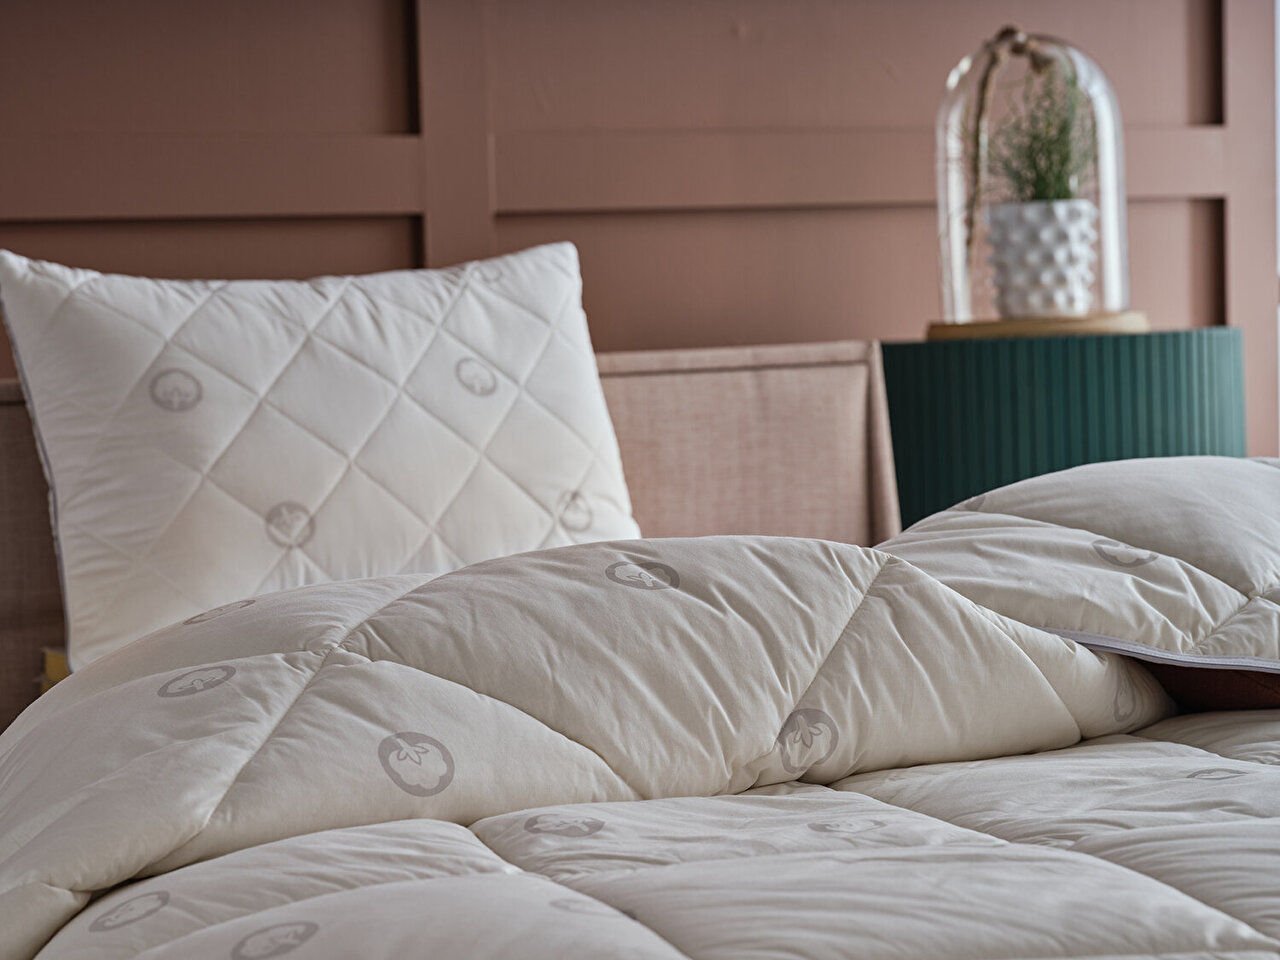 White Festival Cotton Quilt - Queen Size: Cozy and stylish bedding for your queen-size bed